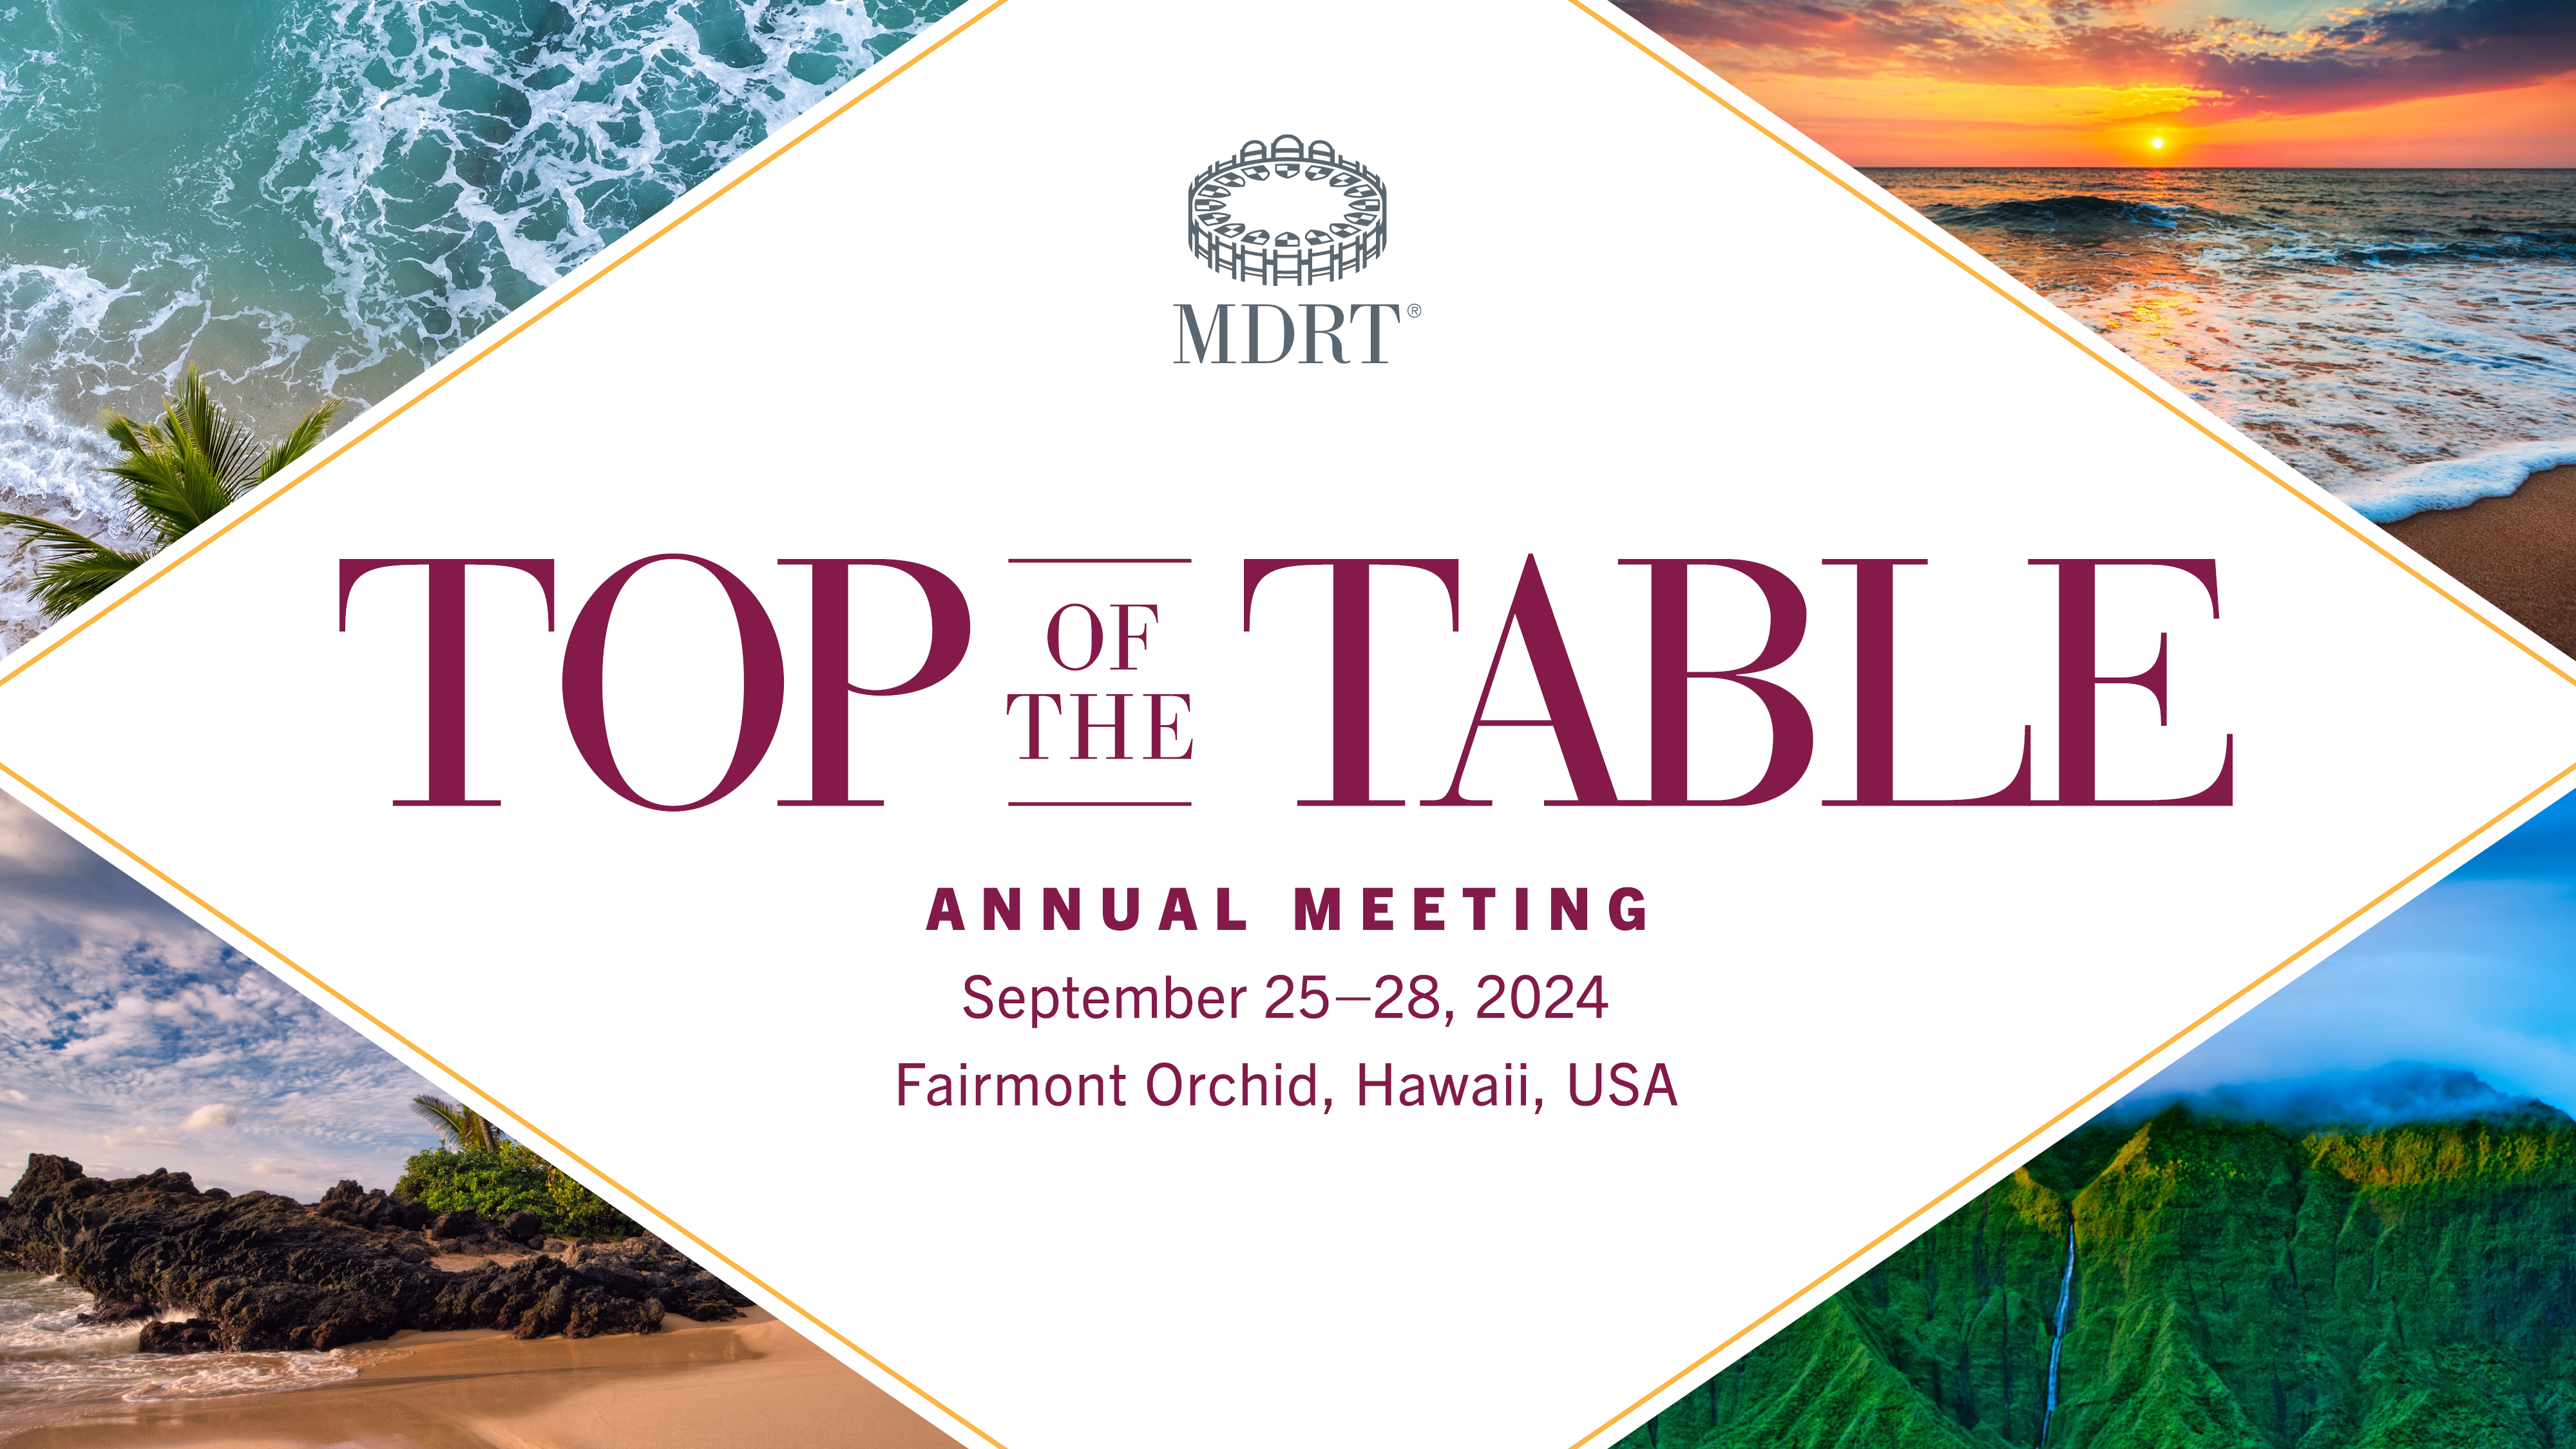 Top of the Table Annual Meeting